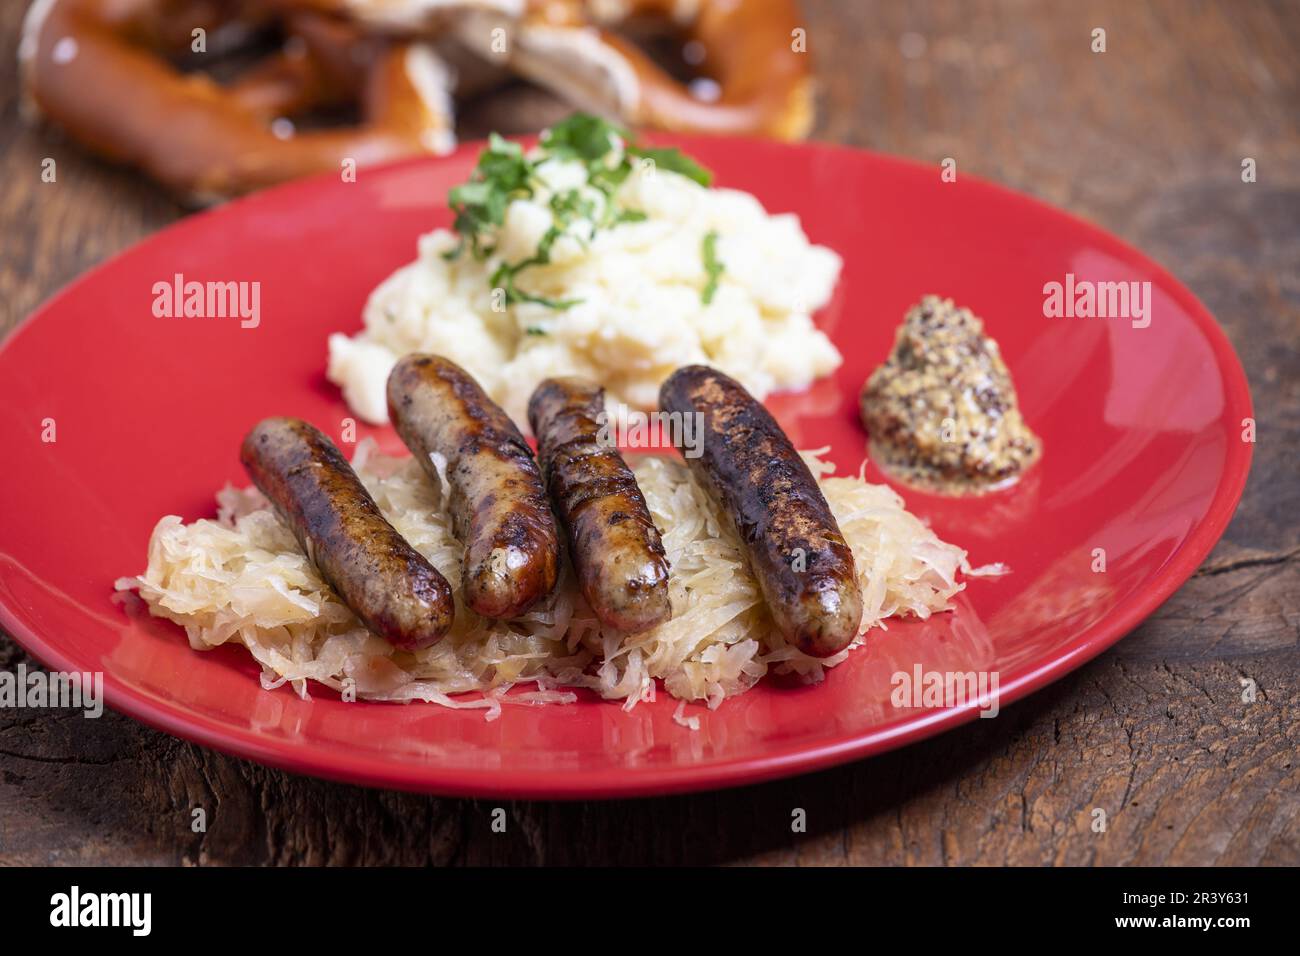 Franconian grilled sausages with sauerkraut Stock Photo